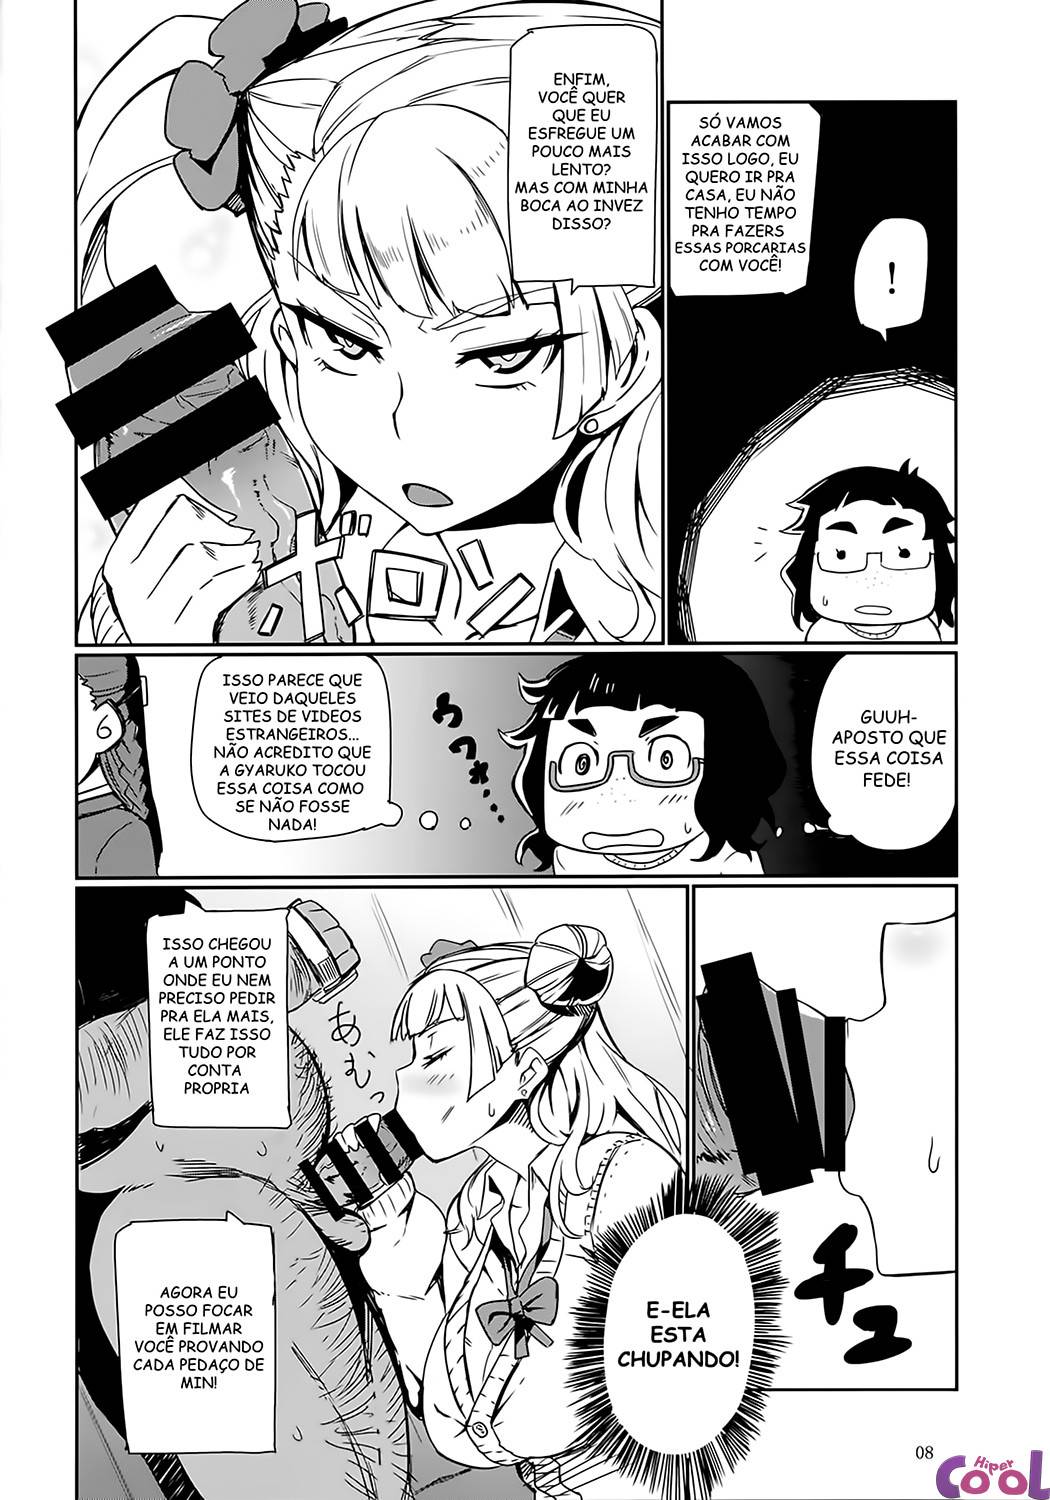 galko-ah--chapter-01-page-08.jpg